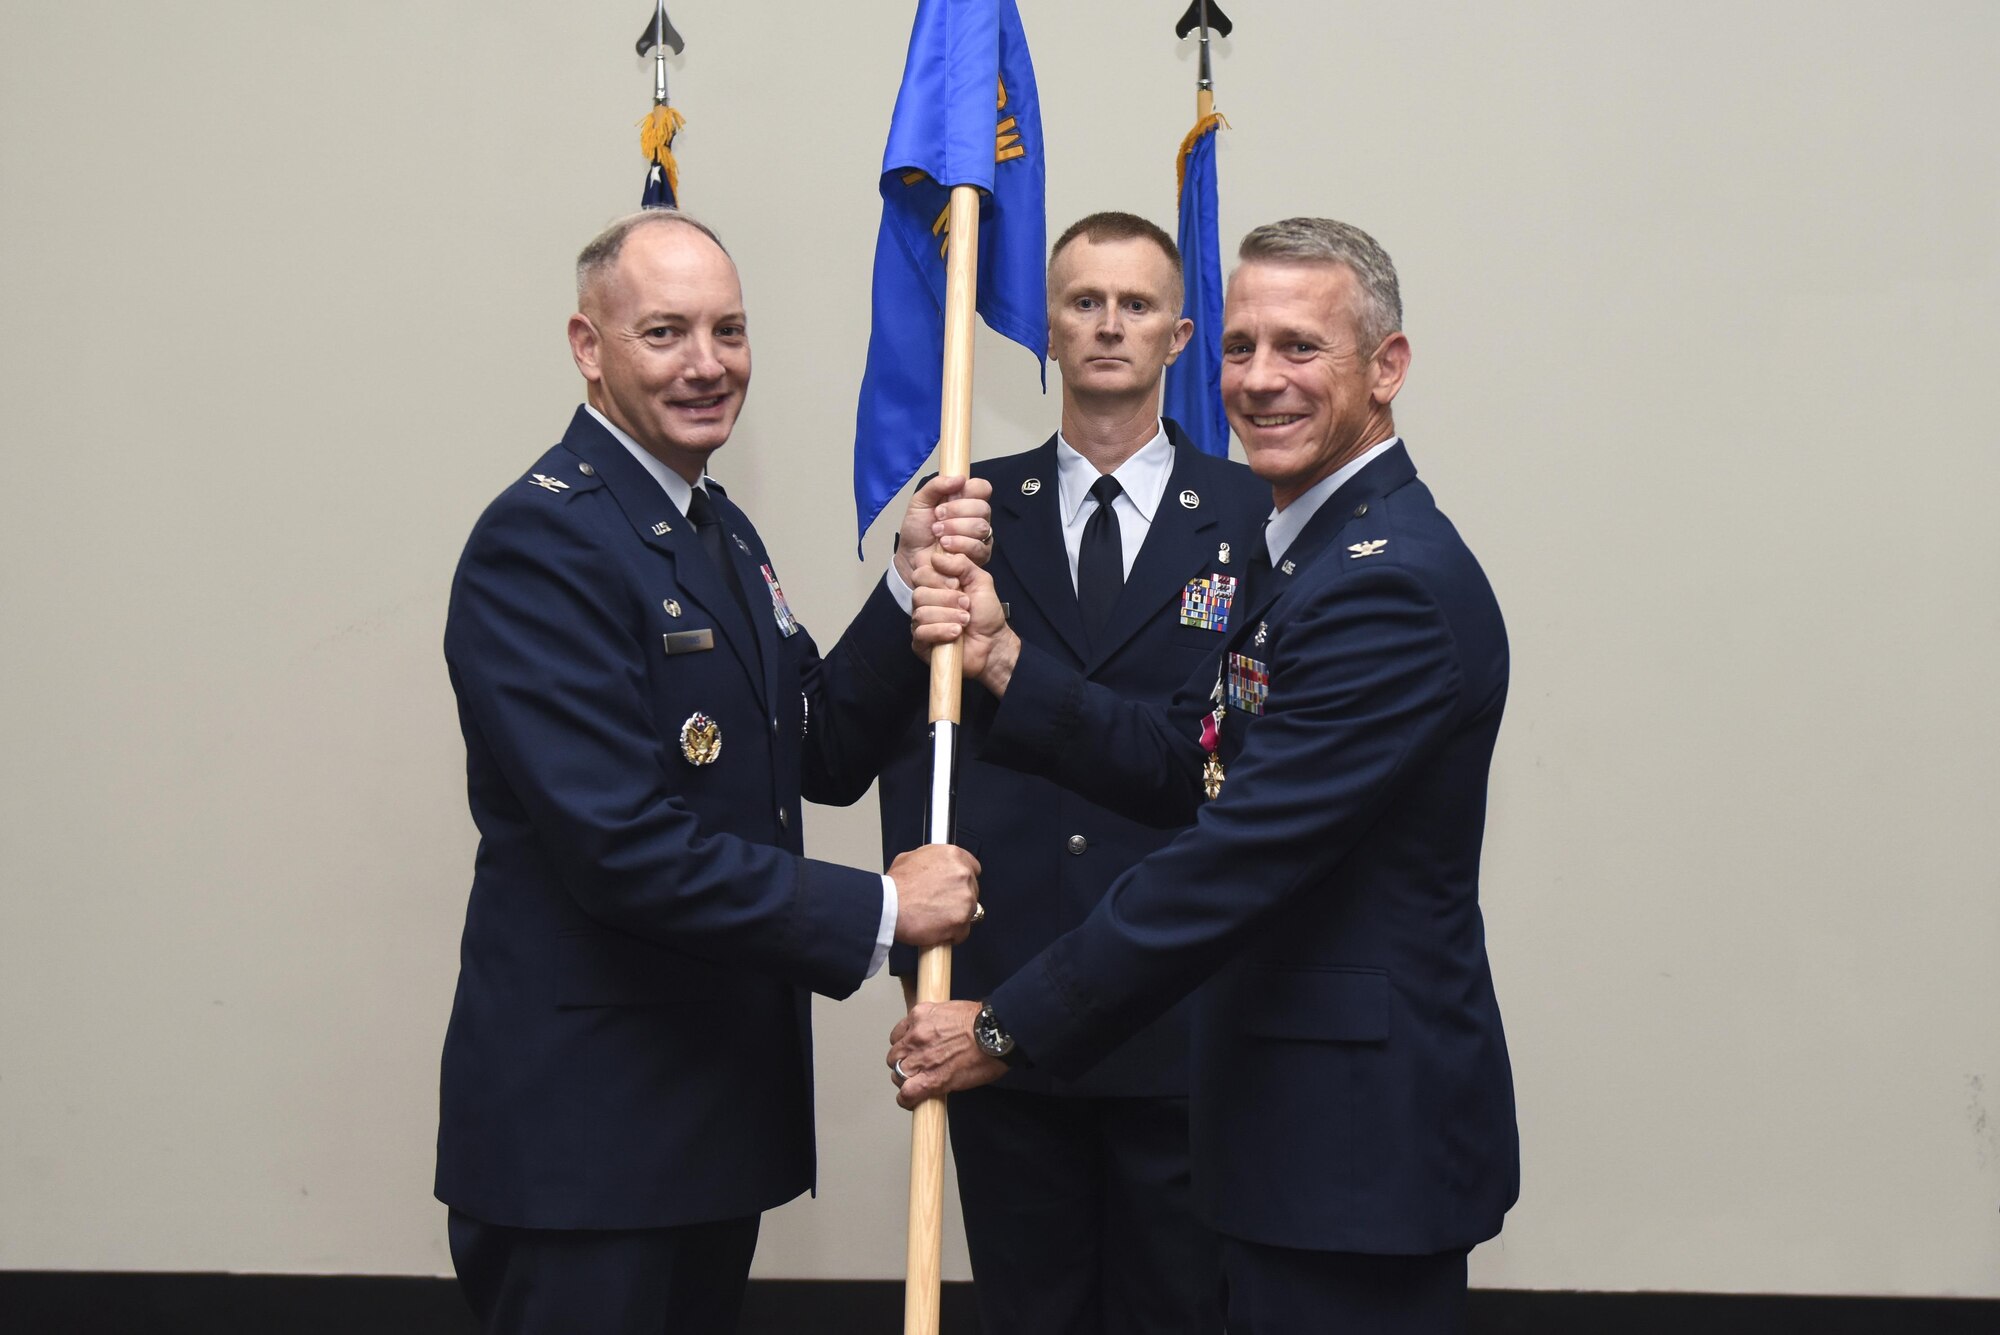 U.S. Air Force Col. Steven Van De Walle, 17th Medical Group Commander, passes the unit guideon to Col. Michael Downs, 17th Training Wing Commander, during the 17th MDG Change of Command ceremony at the Event Center on Goodfellow Air Force Base, Texas, June 13, 2017. The event honored Van De Walle’s service to his unit and welcomed its new commander Col. Janet Urbanski. (U.S. Air Force photo by Airman 1st Class Chase Sousa/Released)